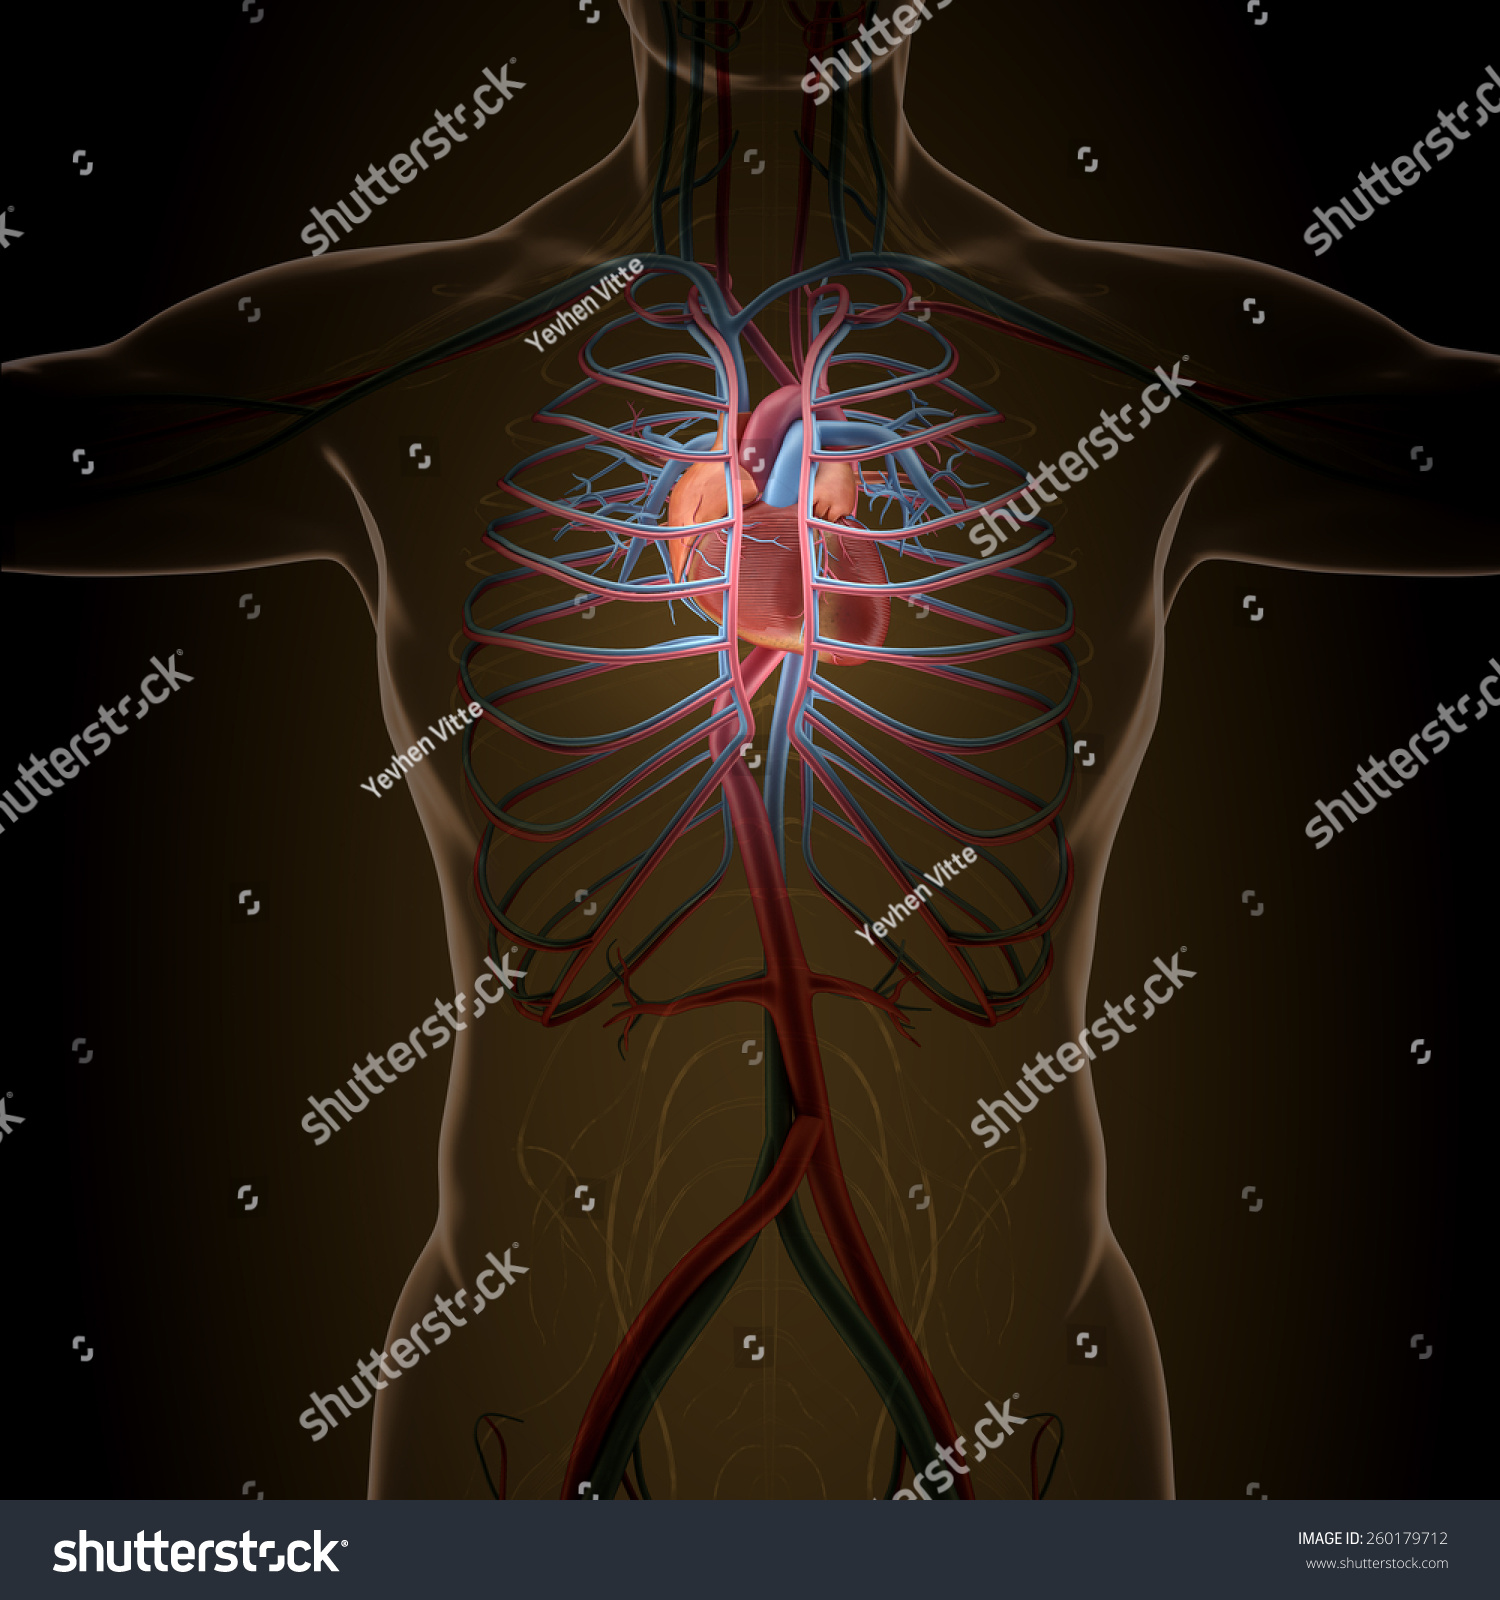 Anatomy Of Human Organs In X-Ray View. High Resolution. Stock Photo ...